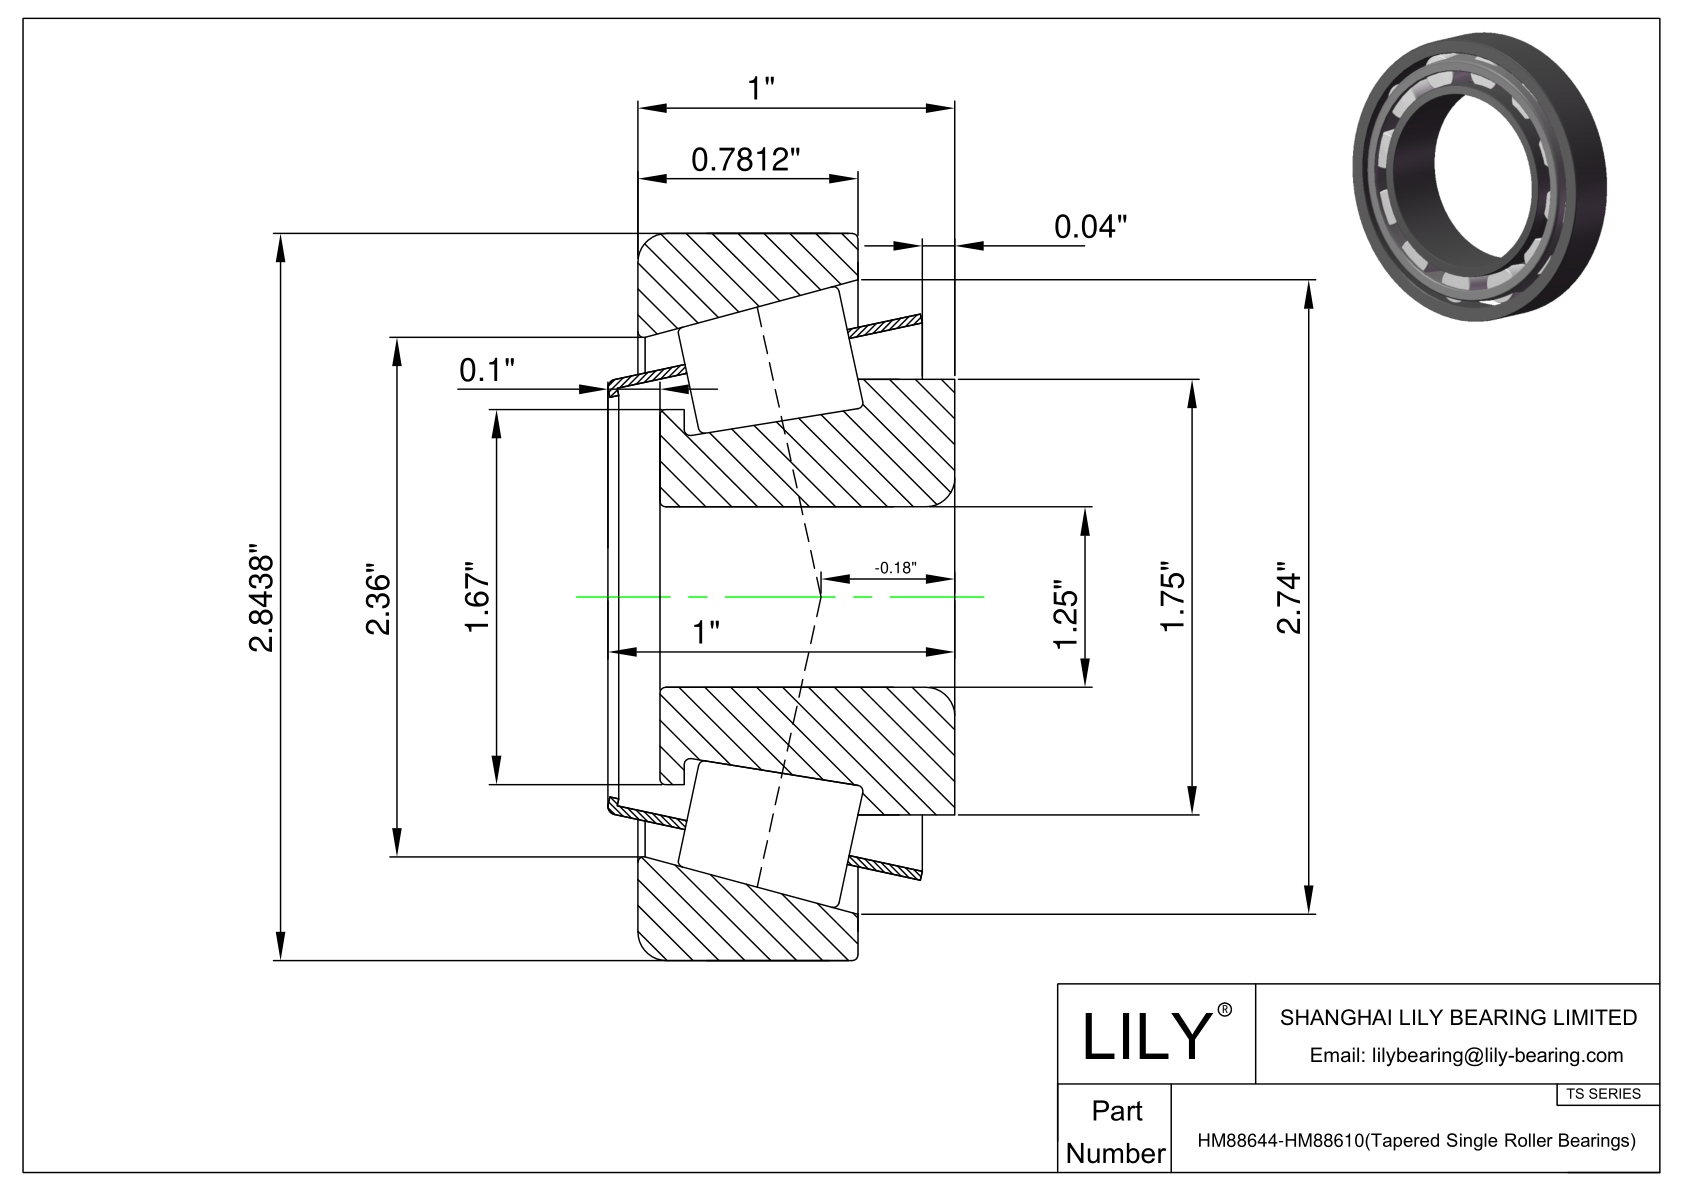 HM88644-HM88610 TS (Tapered Single Roller Bearings) (Imperial) cad drawing